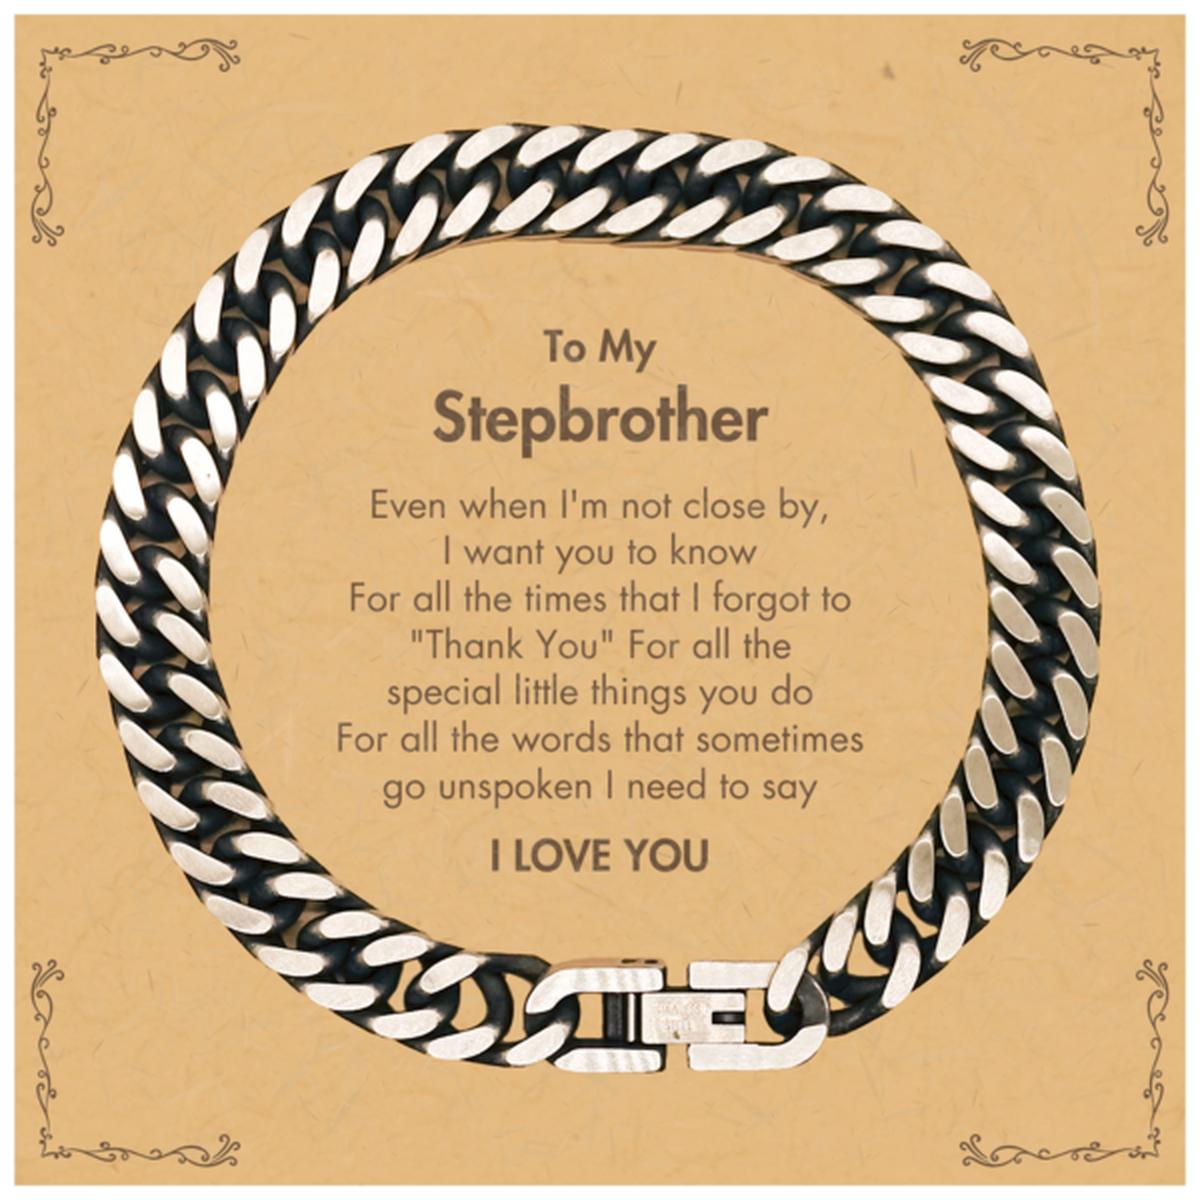 Thank You Gifts for Stepbrother, Keepsake Cuban Link Chain Bracelet Gifts for Stepbrother Birthday Mother's day Father's Day Stepbrother For all the words That sometimes go unspoken I need to say I LOVE YOU